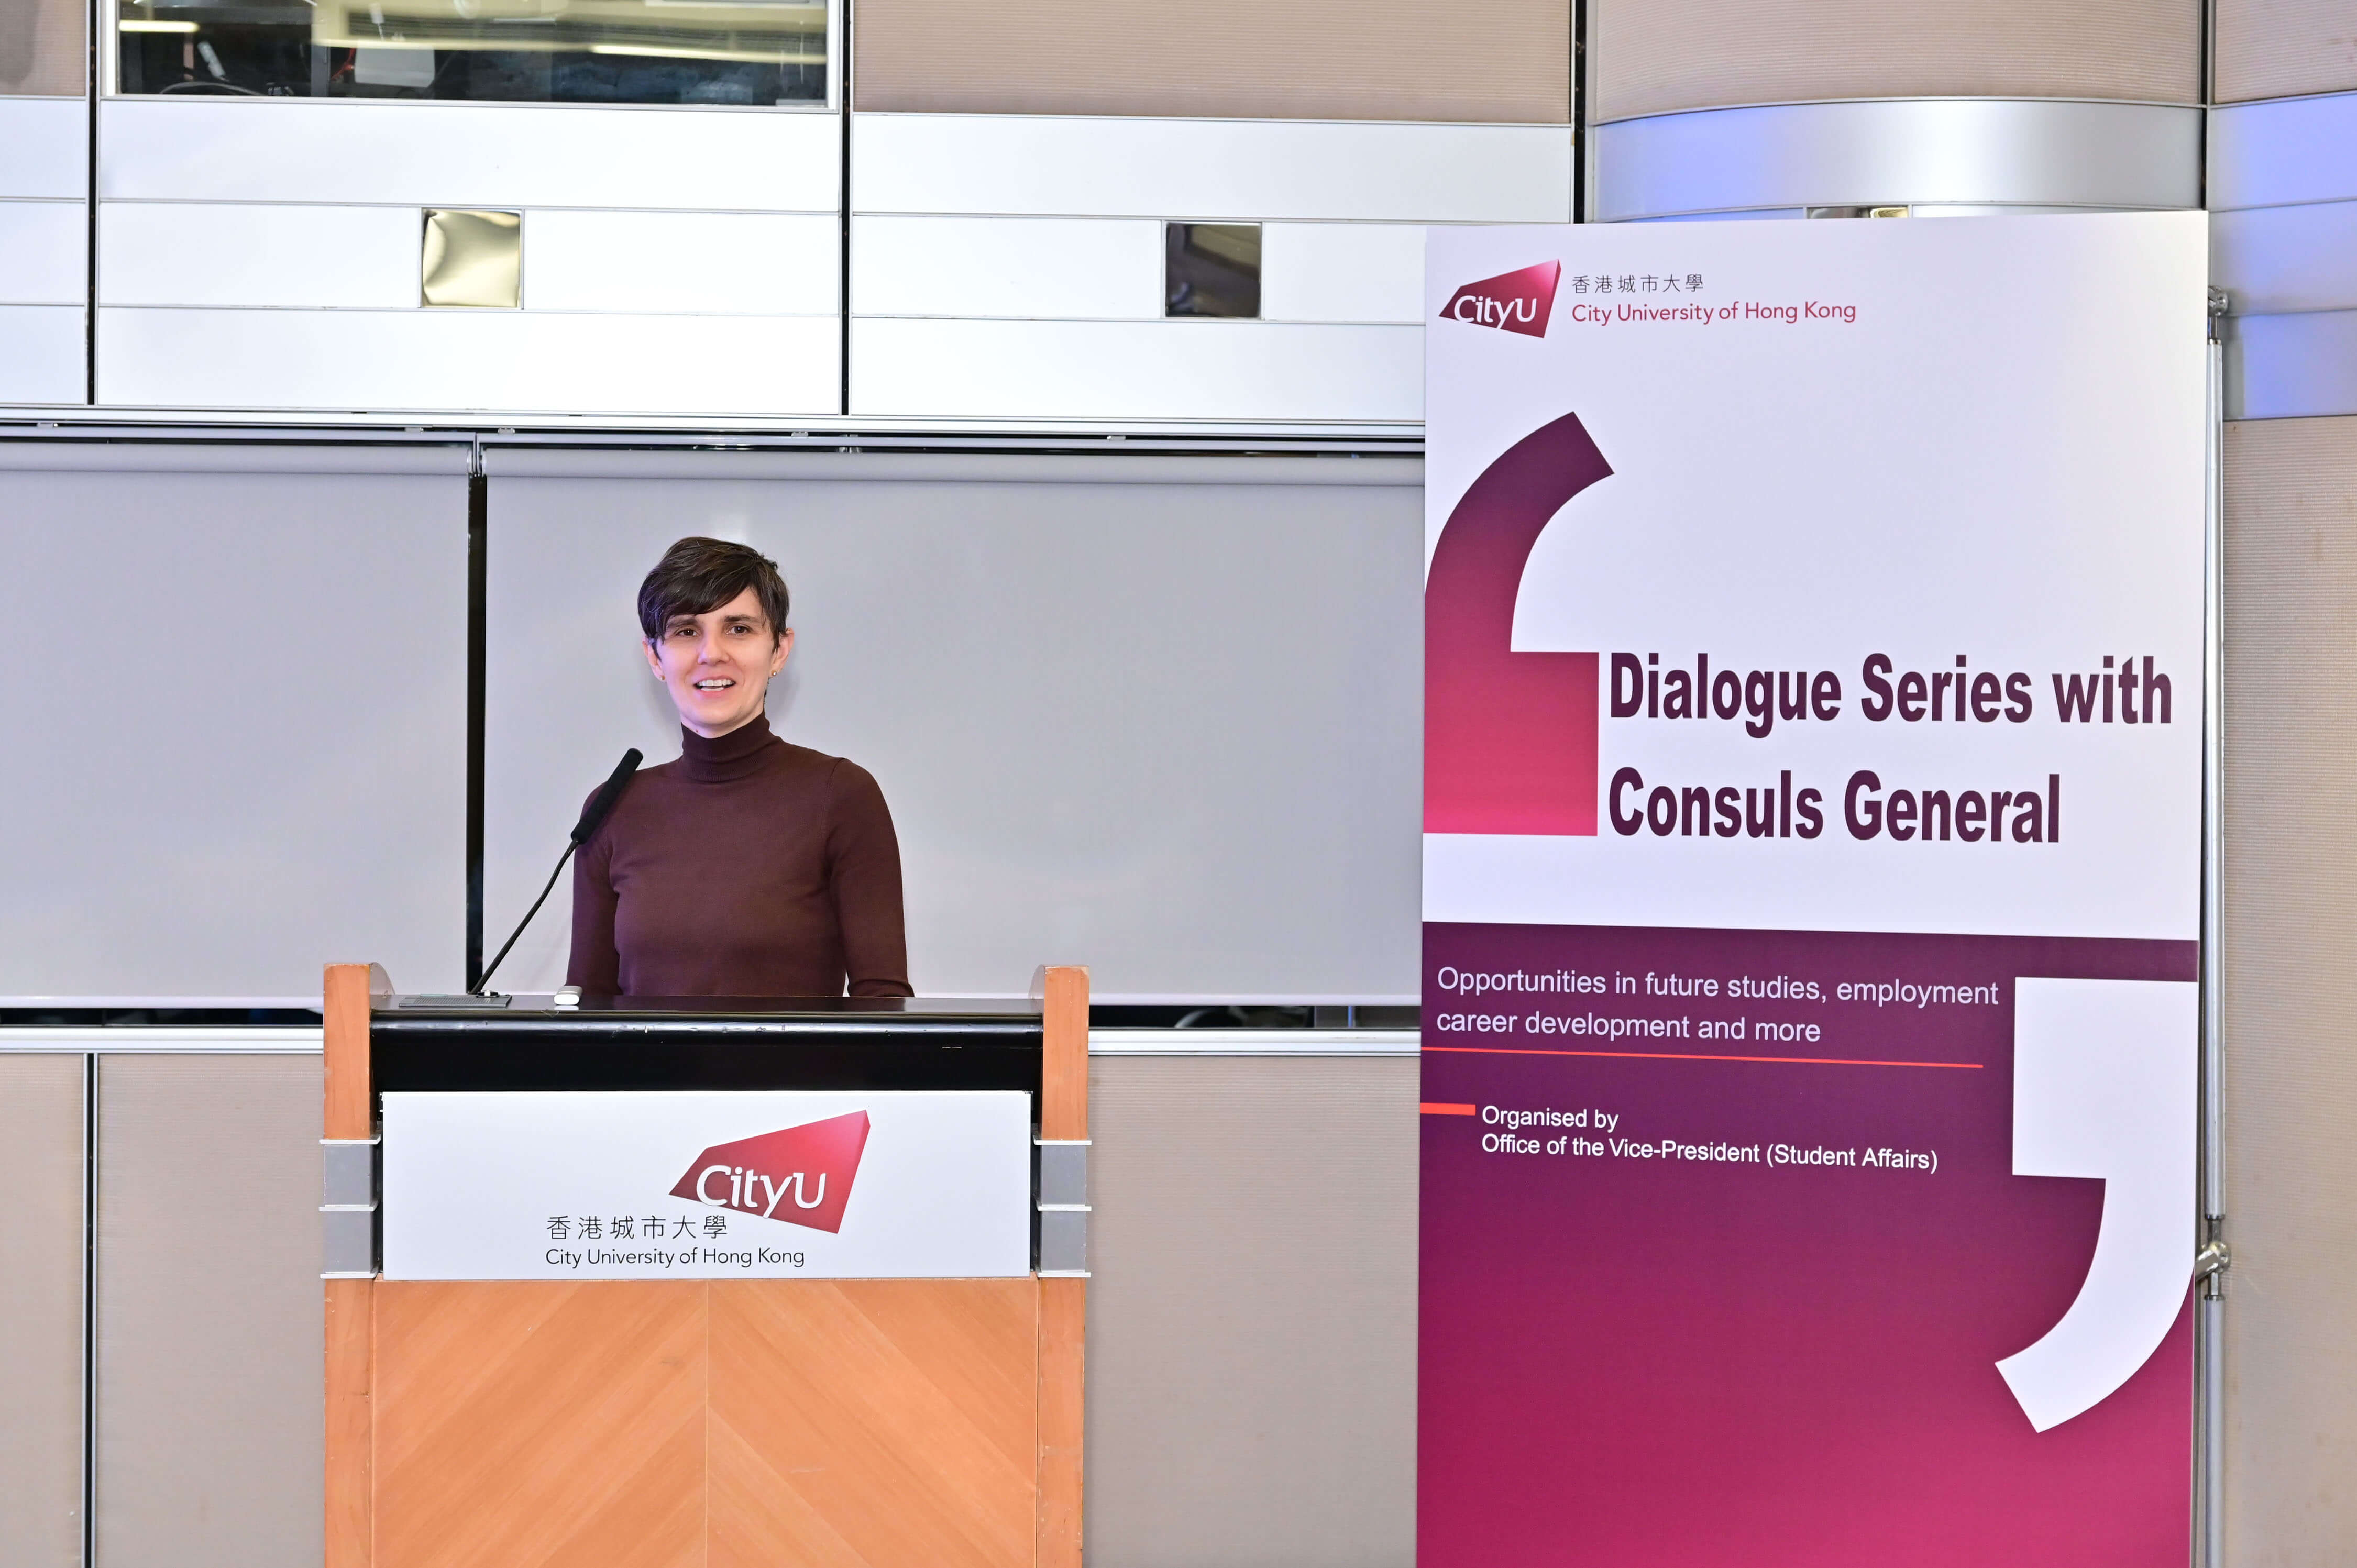 Dialogue Series with Consuls General – Consul General of the Czech Republic in Hong Kong